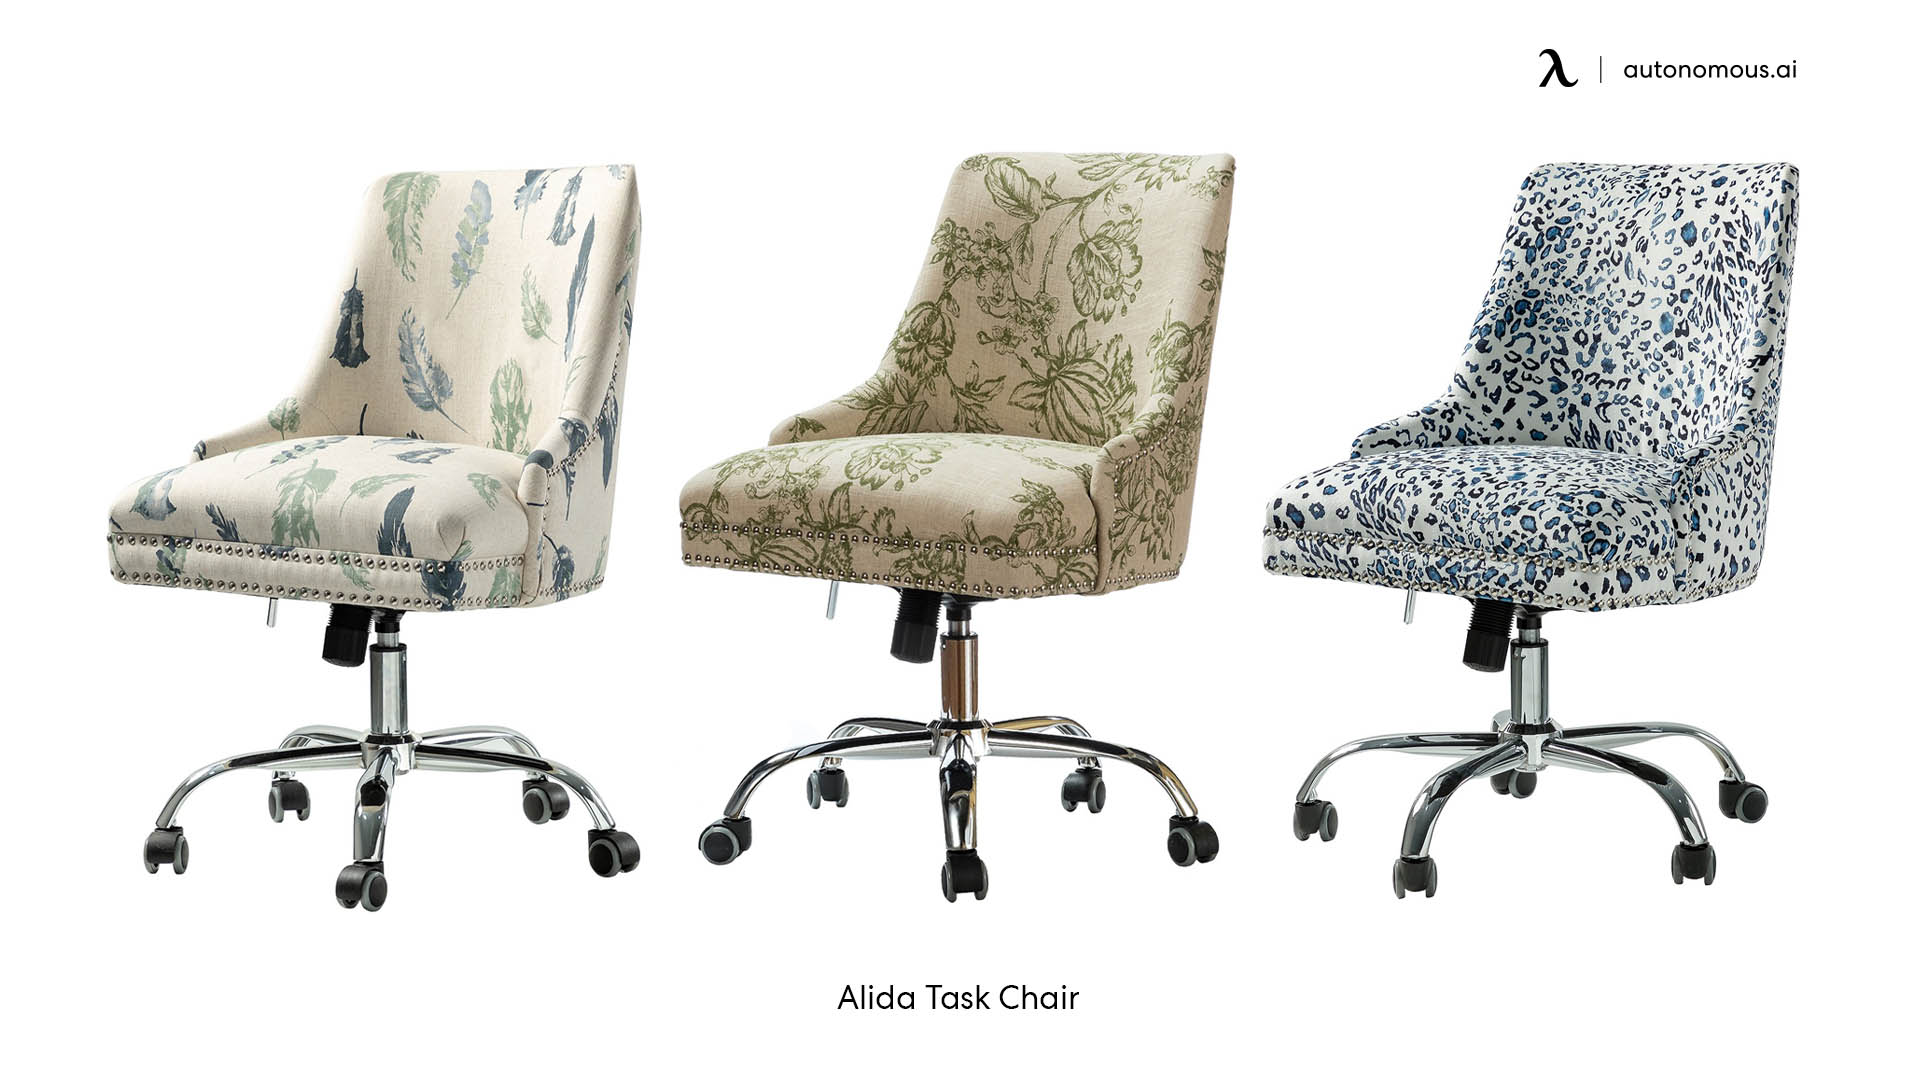 Alida French Country office chair